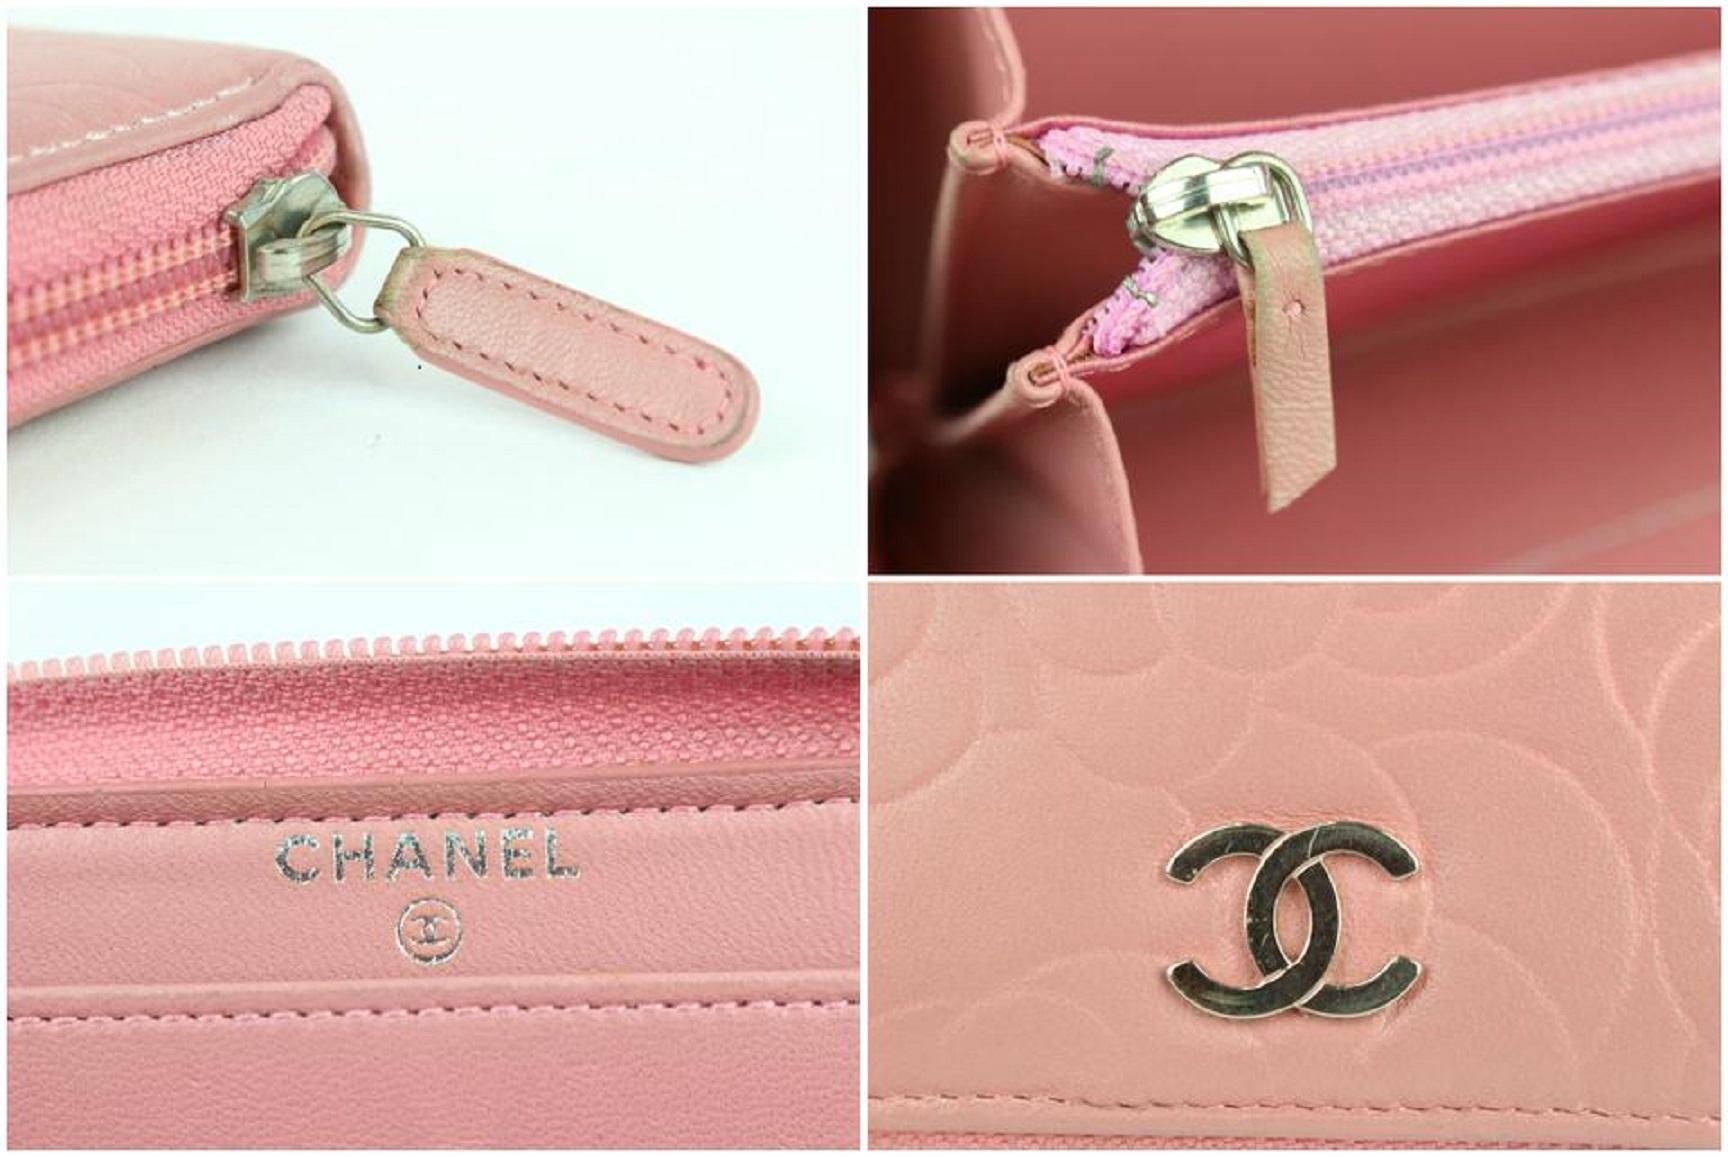 Beige Chanel Embossed Camellia Gusset Zip Around Wallet 2cj1110 Pink Leather Clutch For Sale